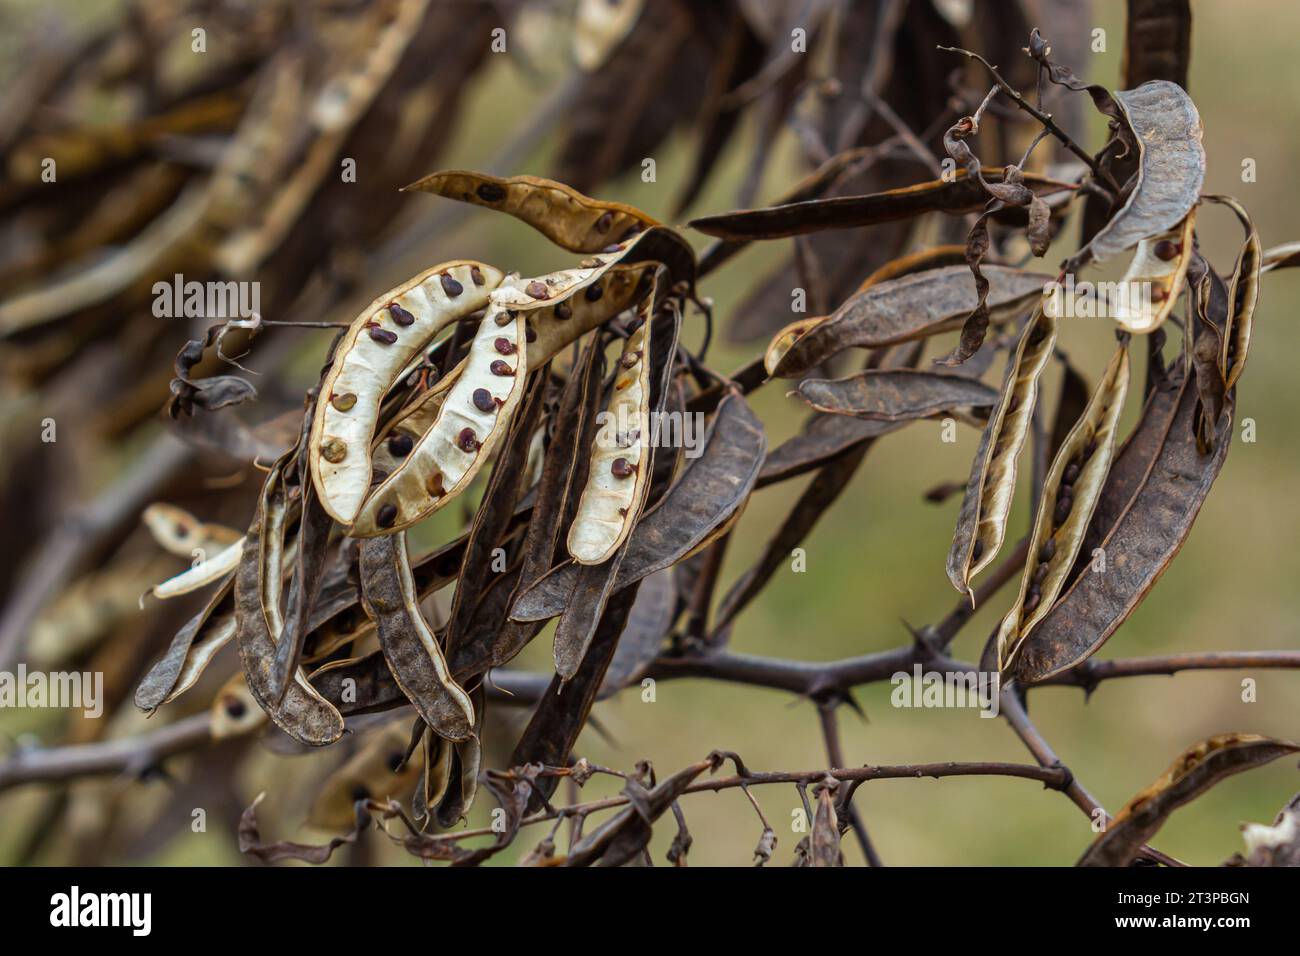 Black locust seeds hanging and dry so that the black seed fall out. Black locust seed pods. Stock Photo